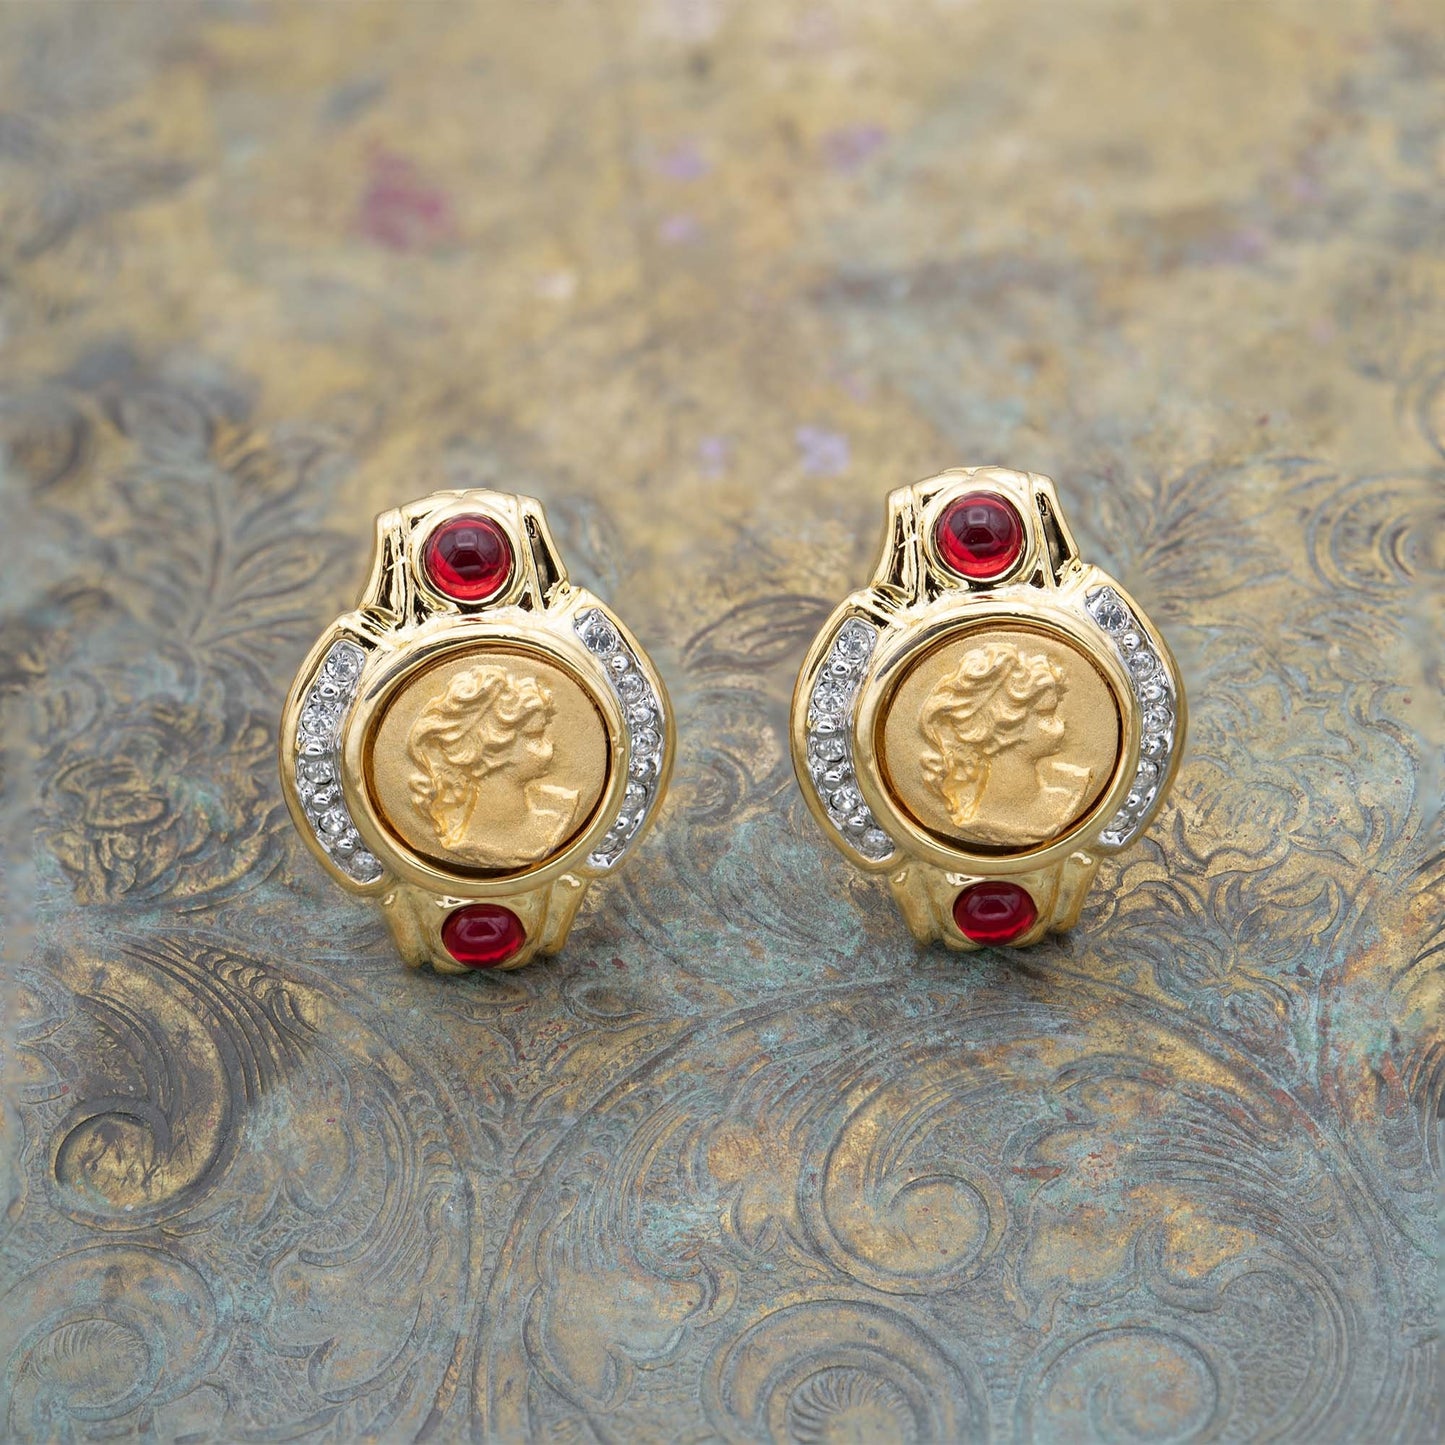 Vintage Antique Gold Earrings Coin with Ruby and Clear Crystals Roman Collectable Cameo Coin Handmade E4089-CY - Limited Stock - Never Worn